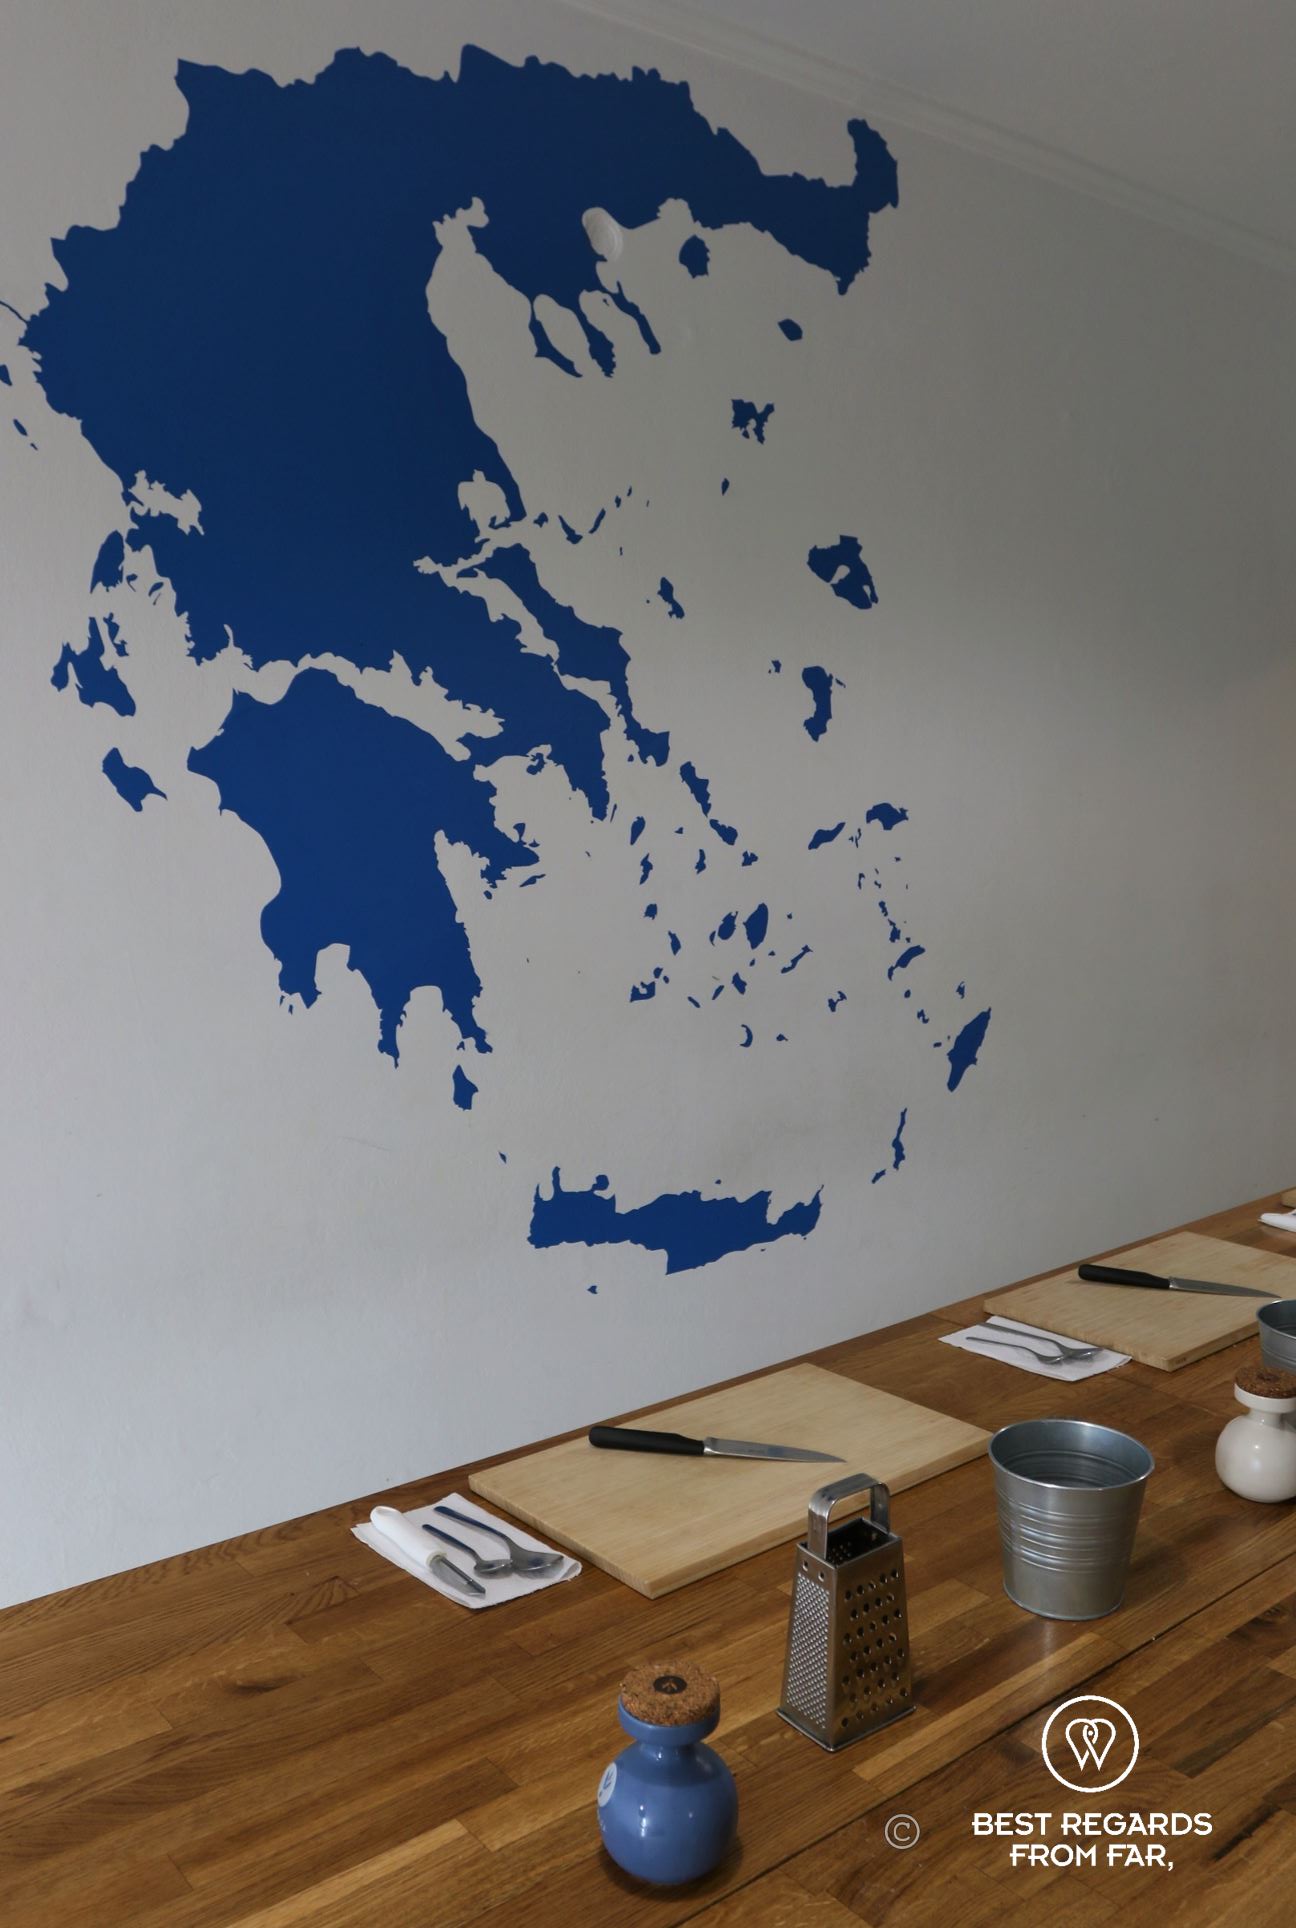 Greece painted in blue on a white wall and wooden table with chopping boards and cutlery.